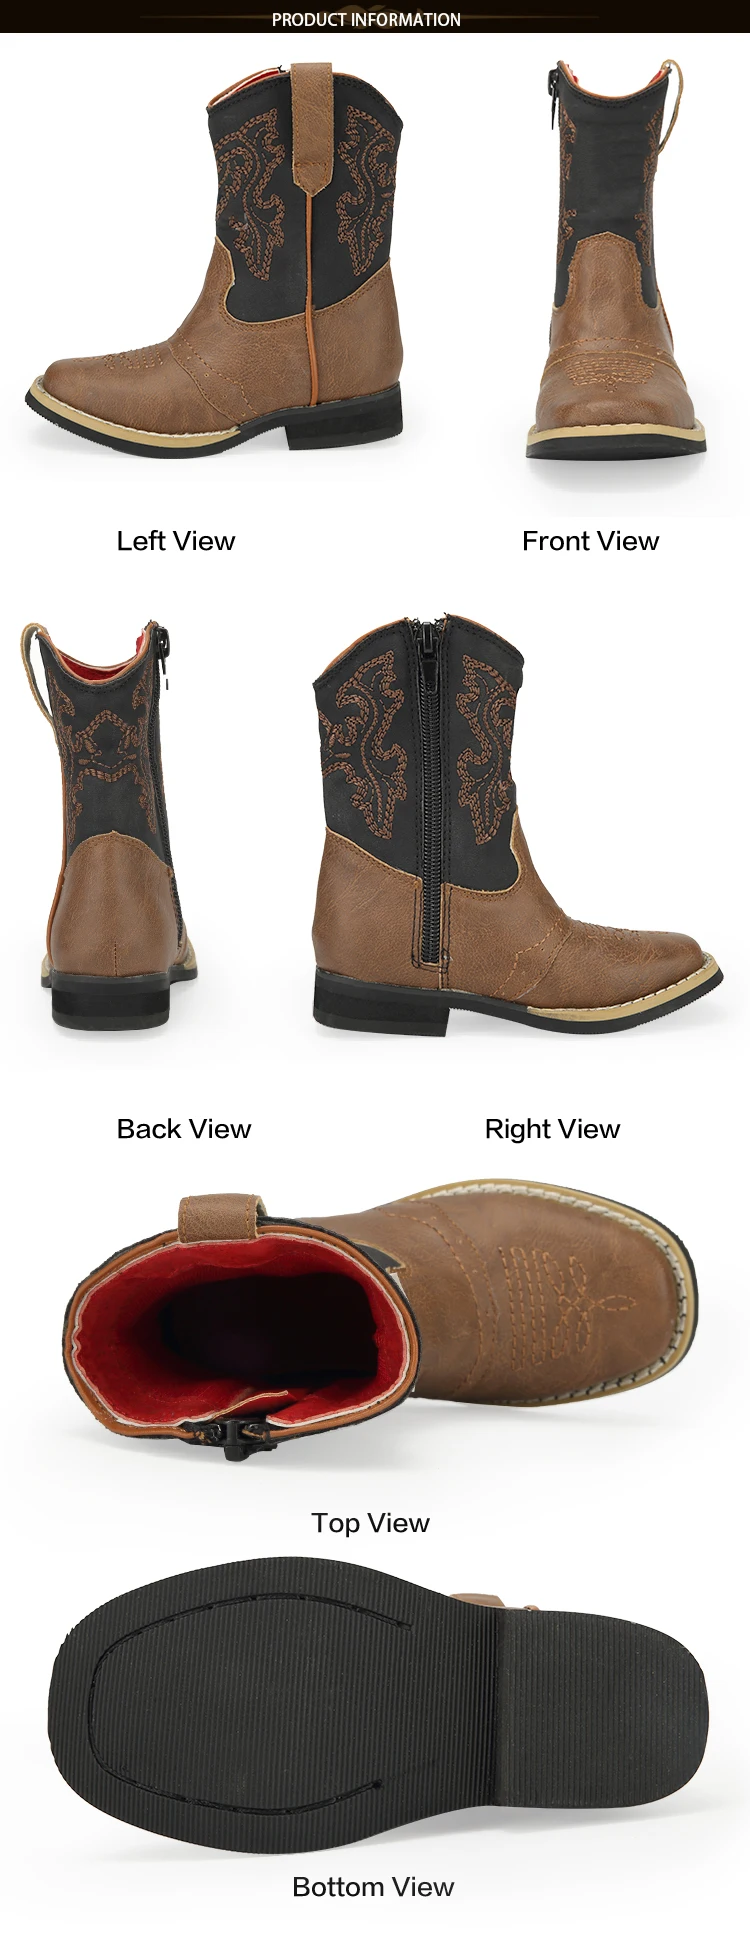 wholesale cowboy boots from mexico